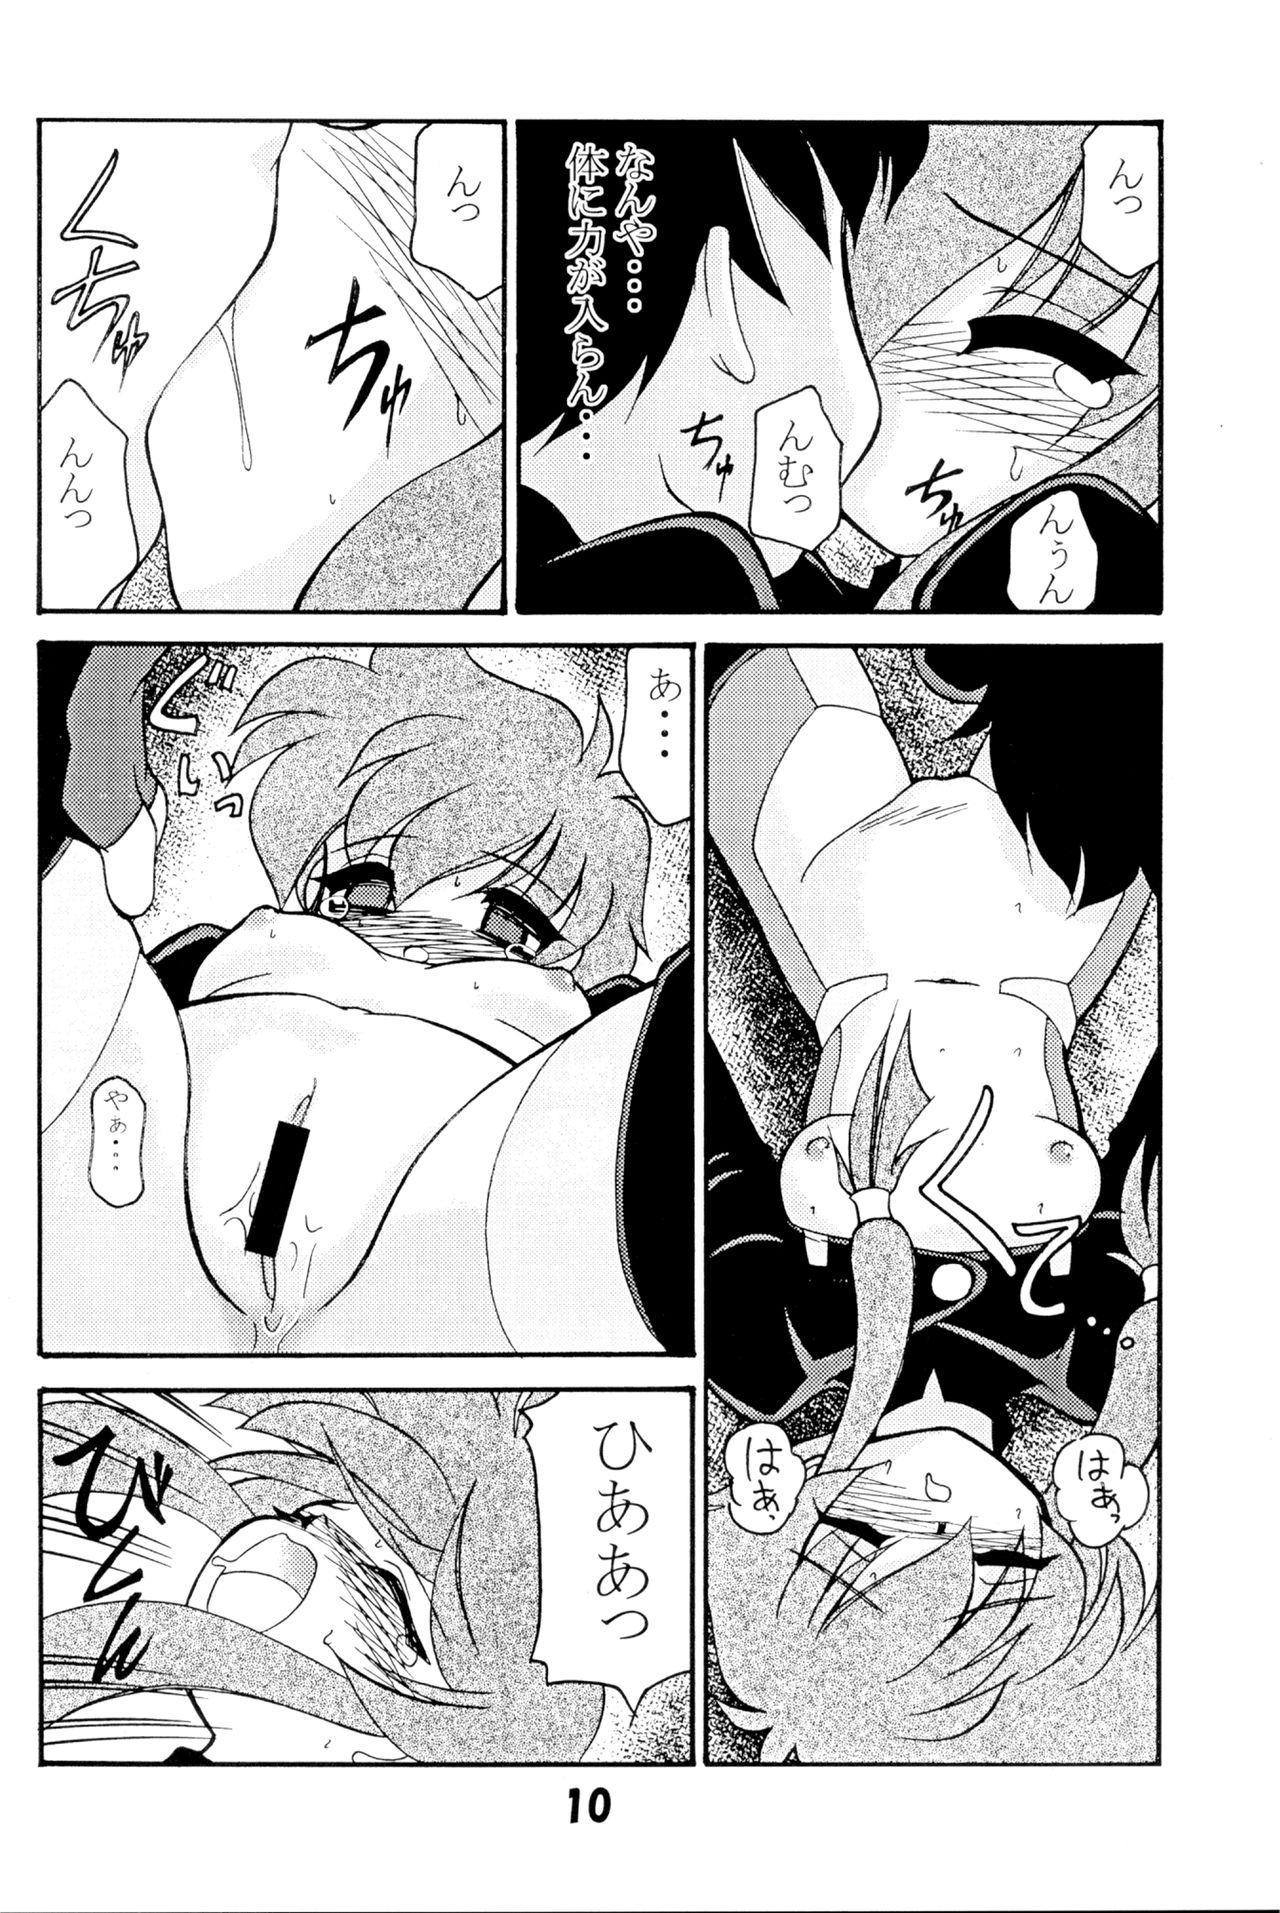 Cuckolding VERSUS - Magic knight rayearth Angelic layer Chica - Page 9